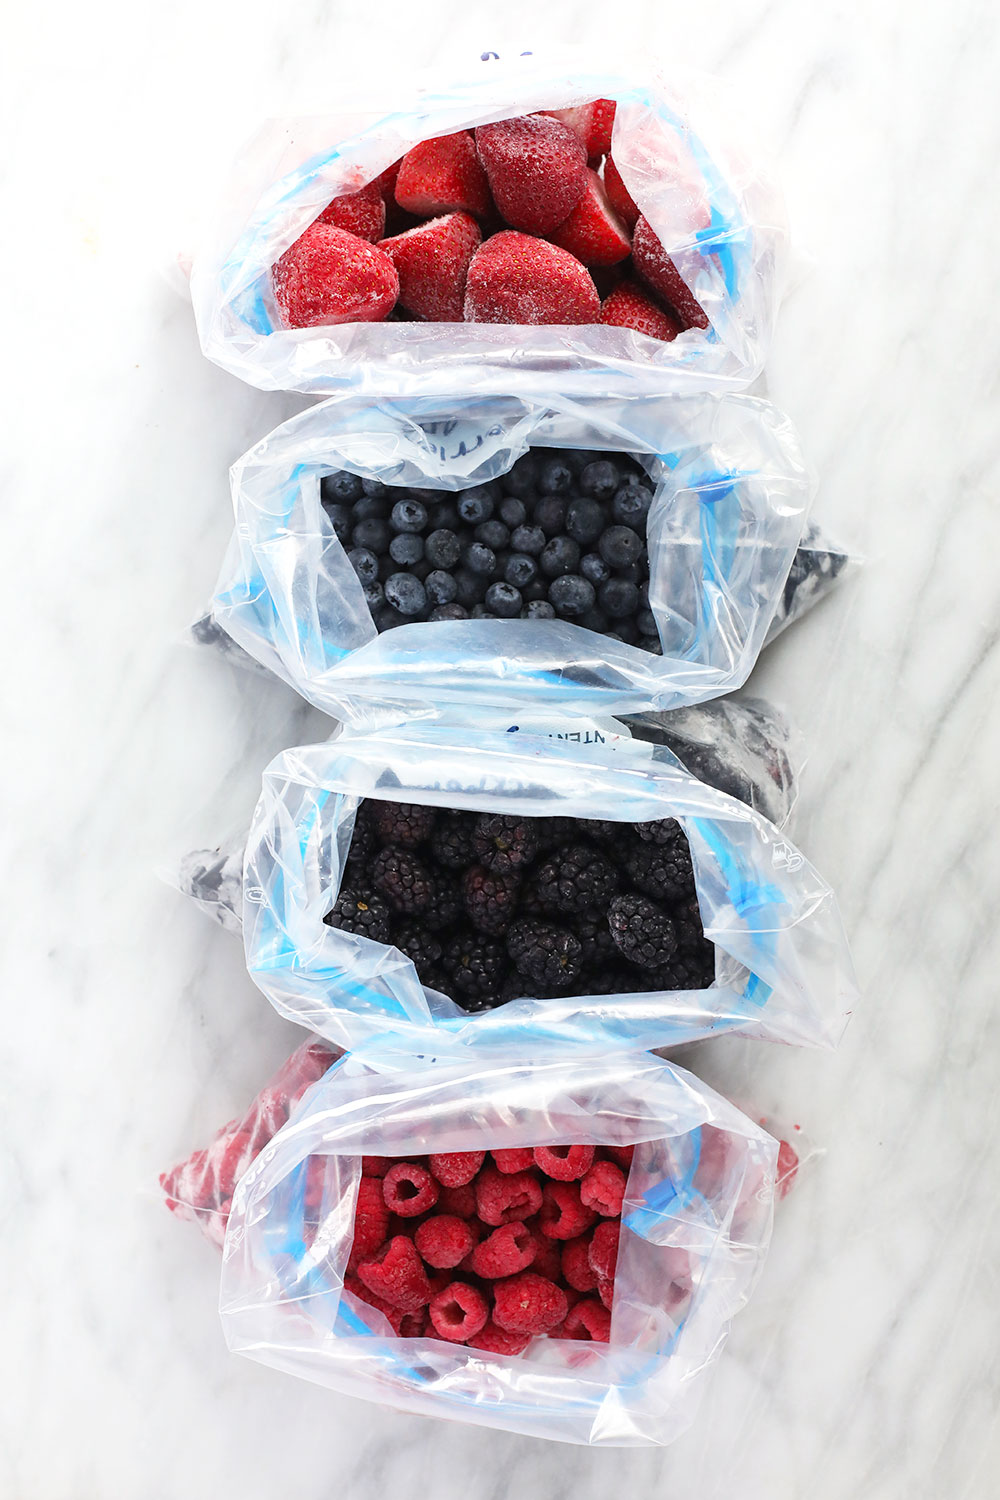 frozen berries in ziploc bags ready to be placed in the freezer